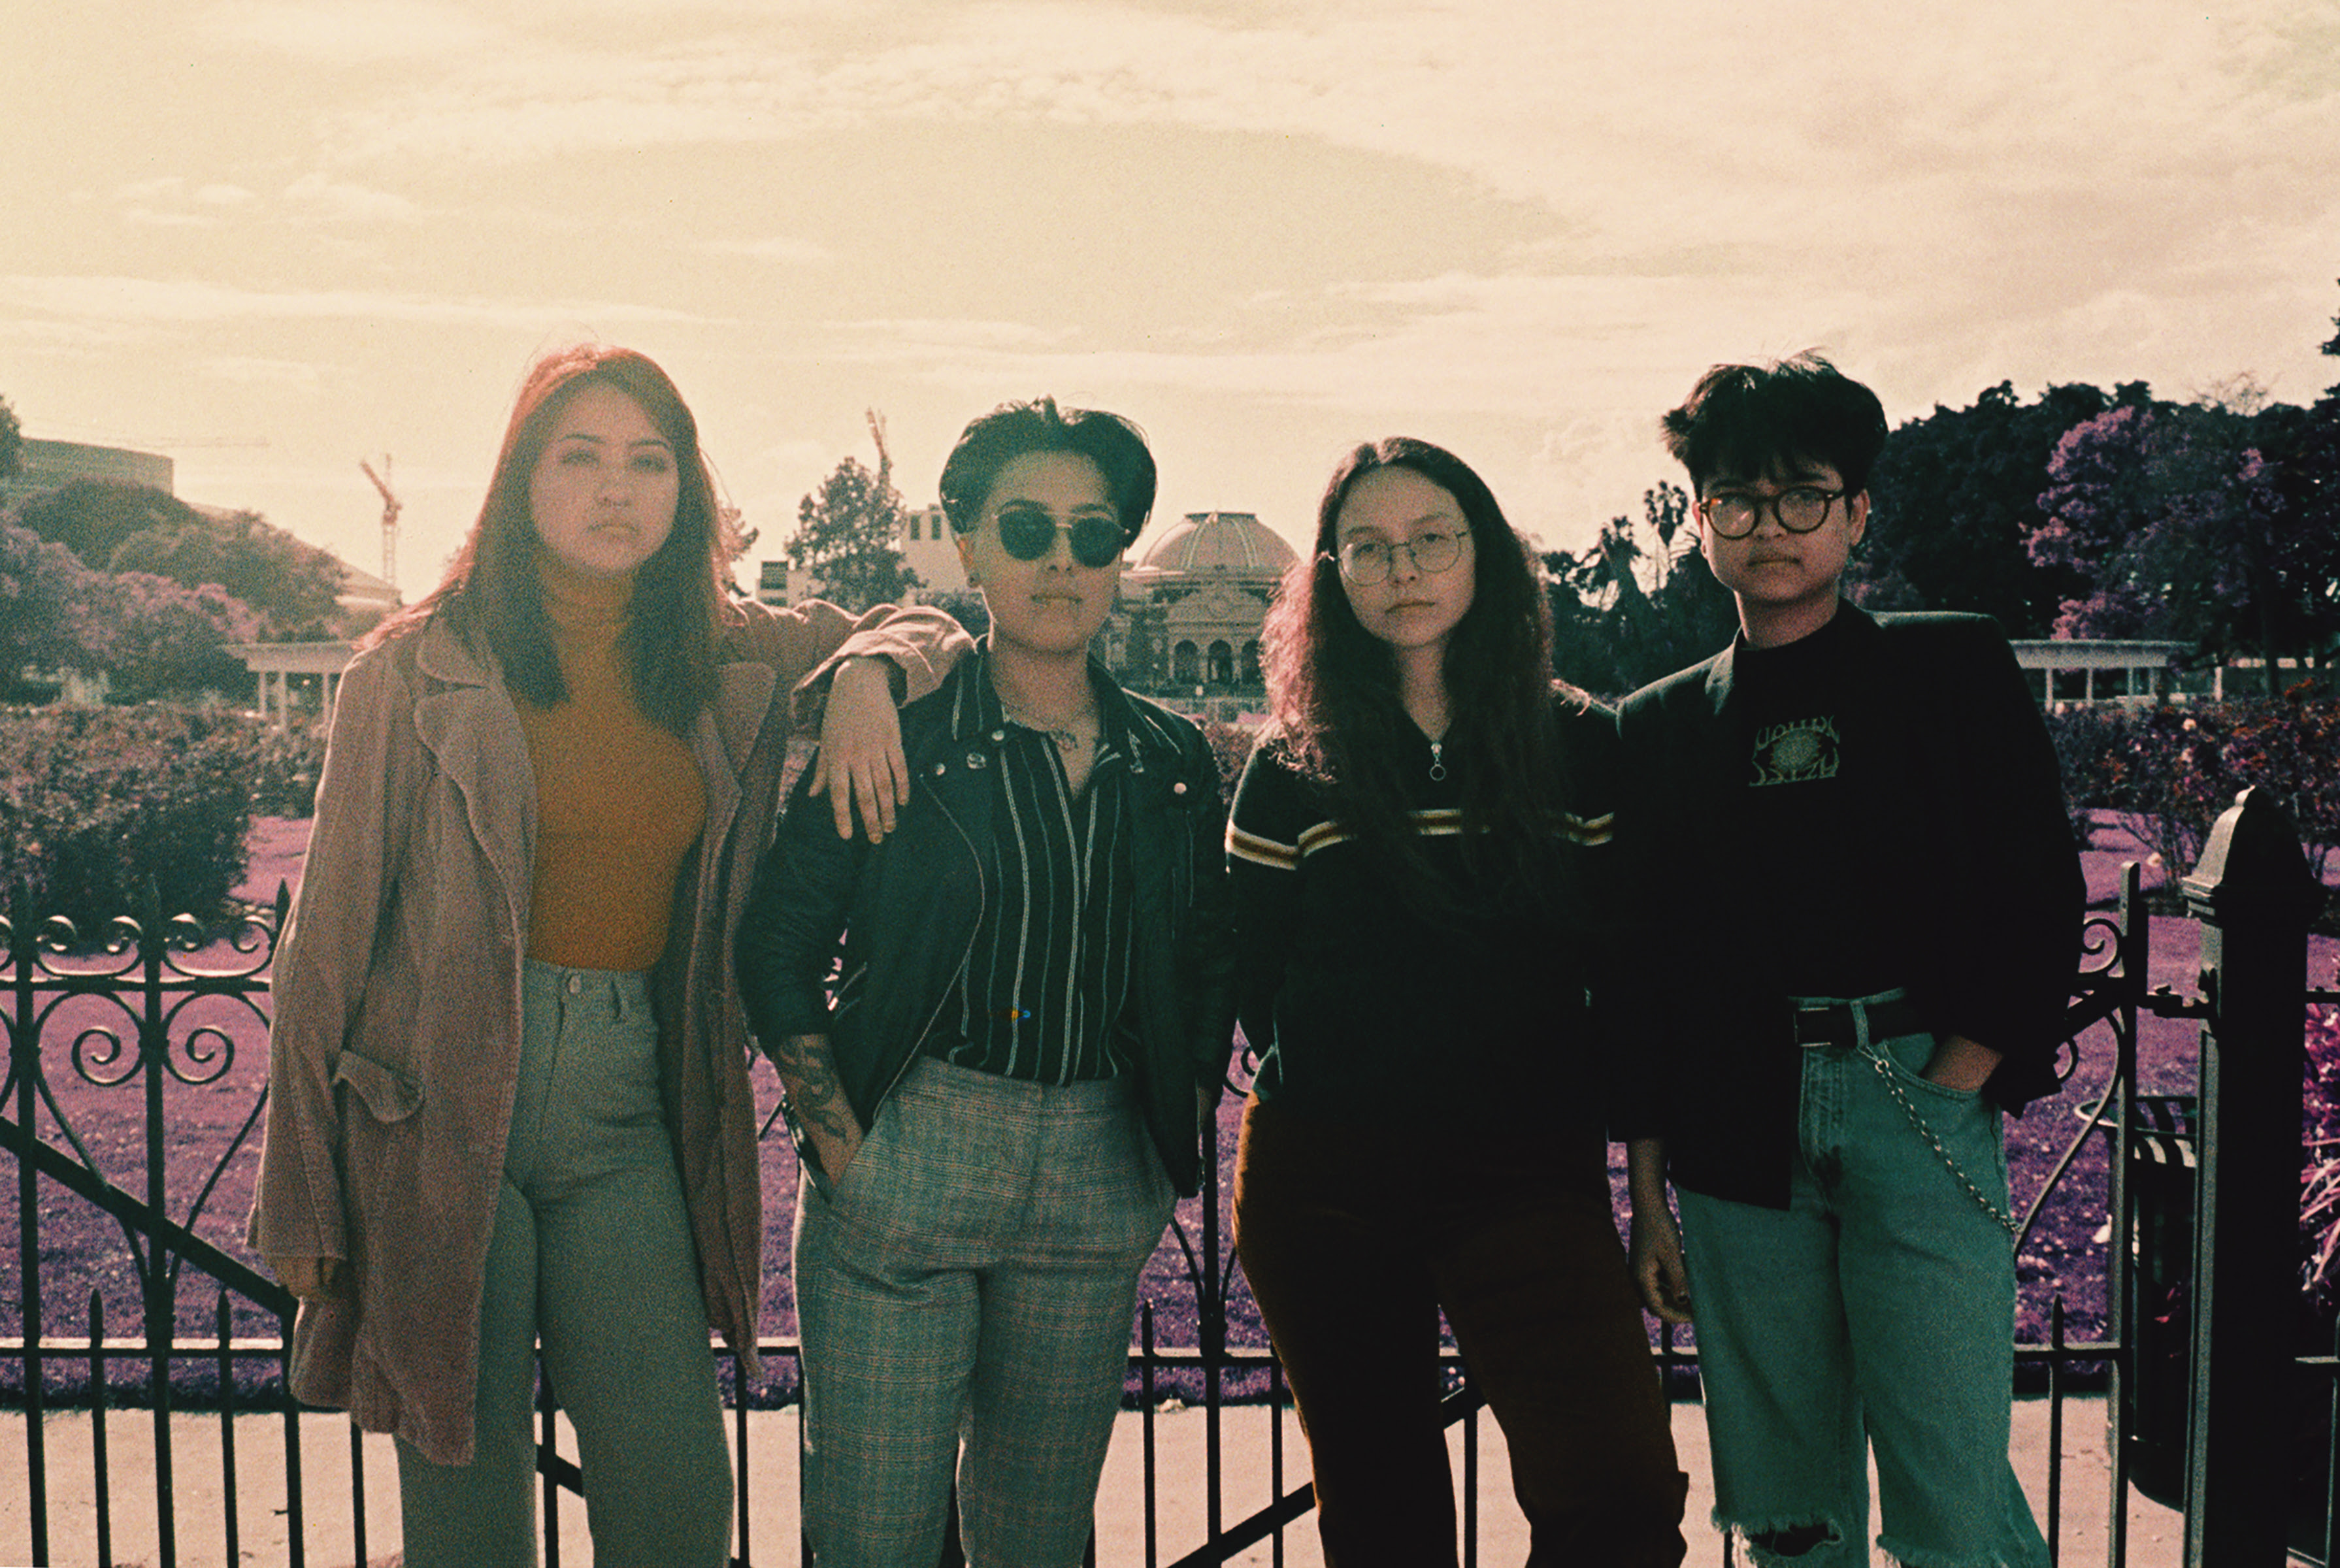 "Friday Nights" by Ariel View is Northern Transmissions' 'Song of the Day'